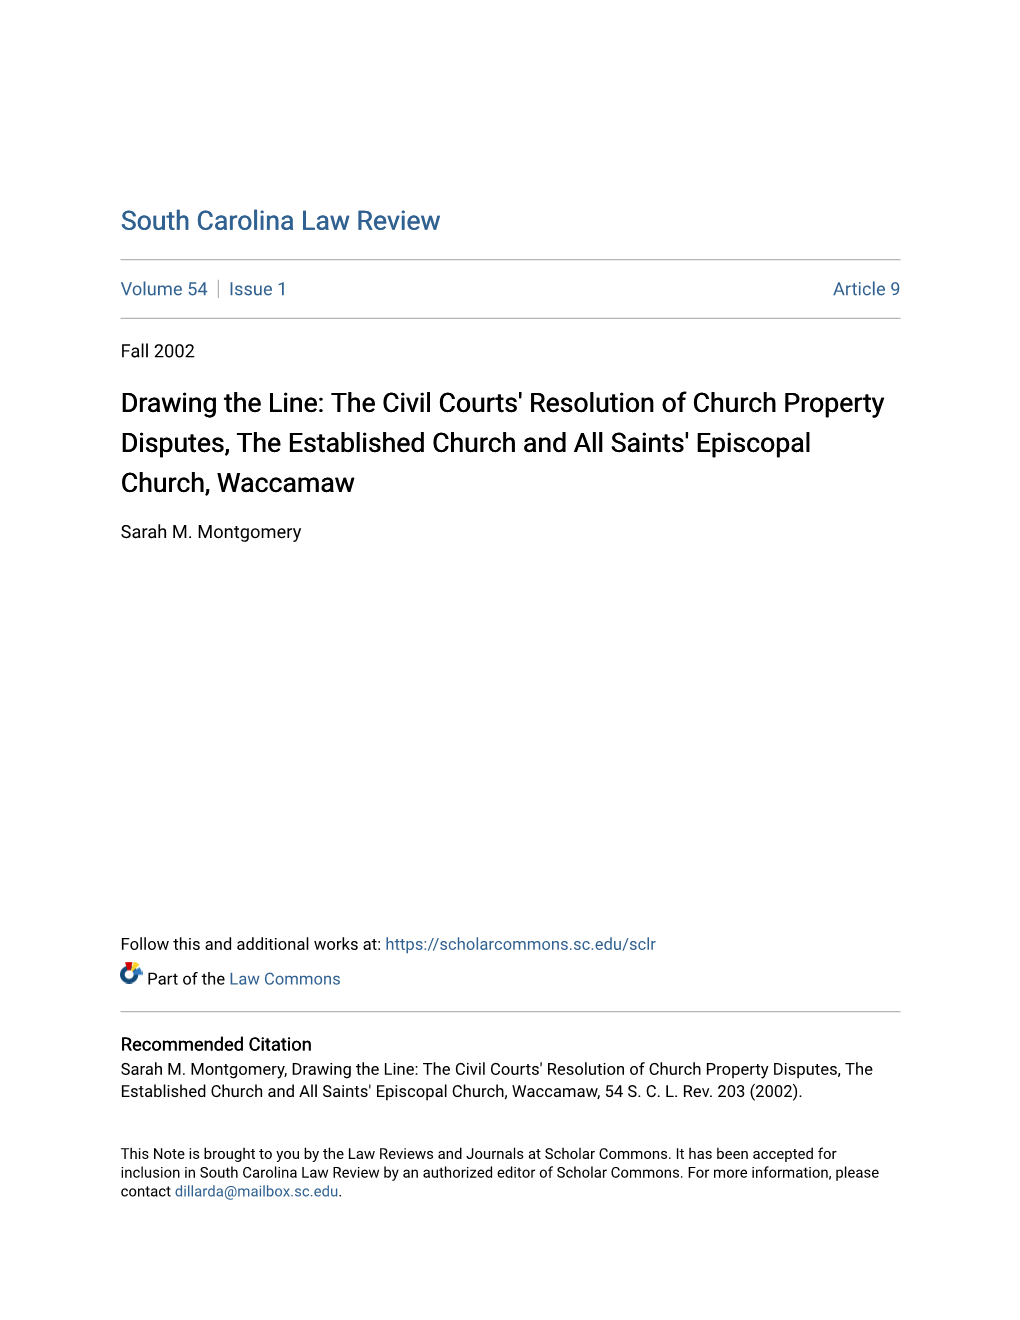 The Civil Courts' Resolution of Church Property Disputes, the Established Church and All Saints' Episcopal Church, Waccamaw